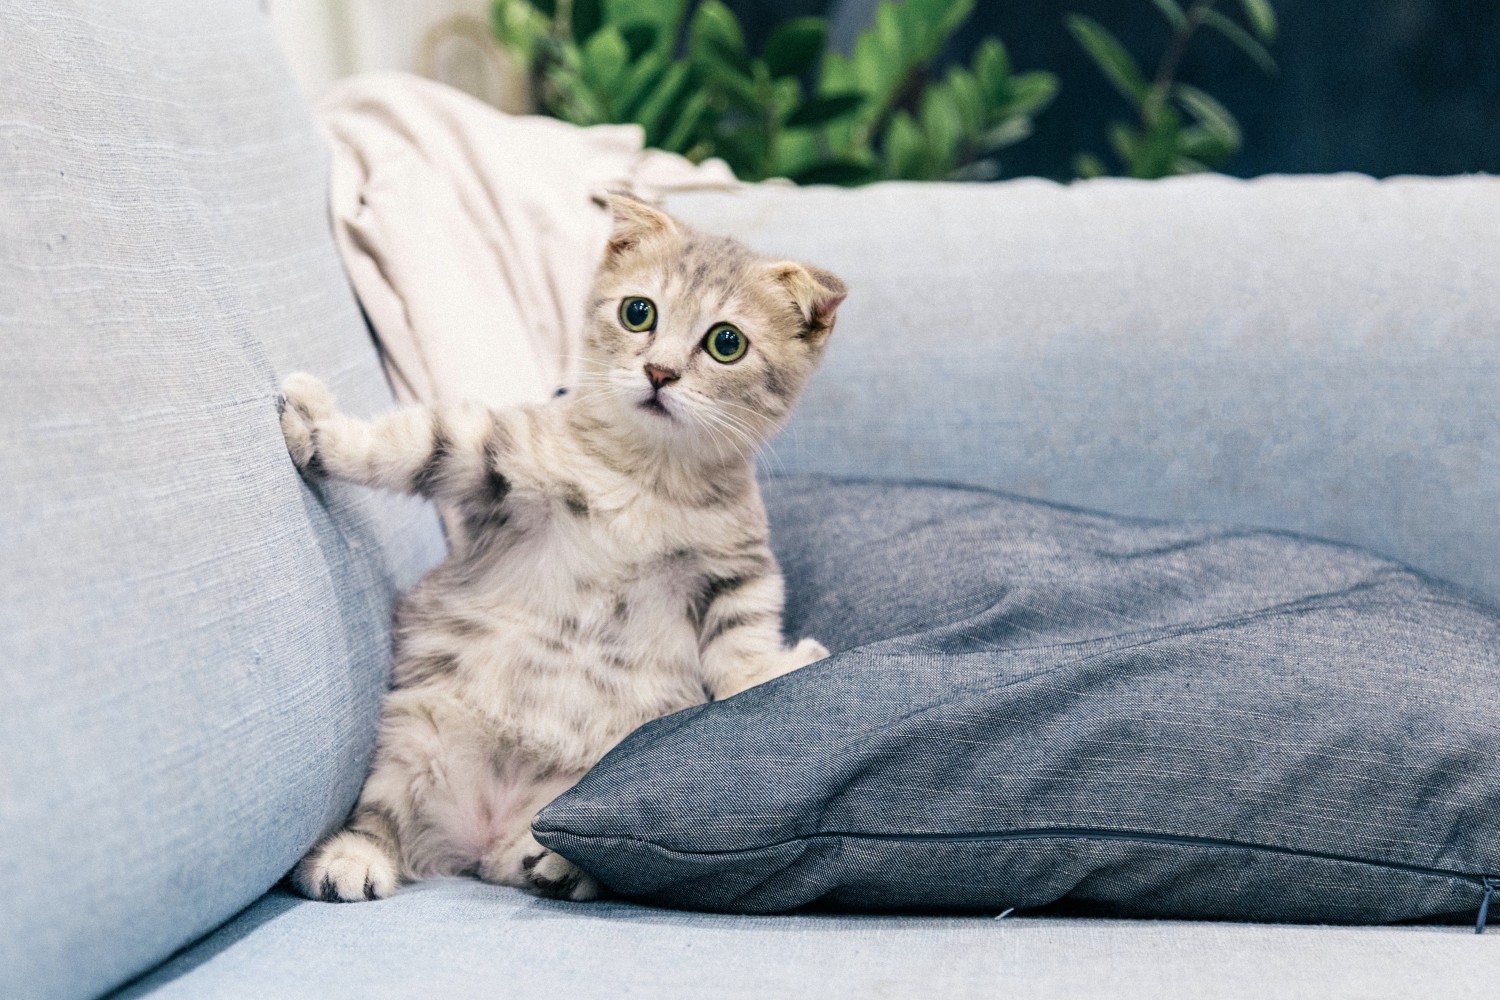 Kitten on a couch